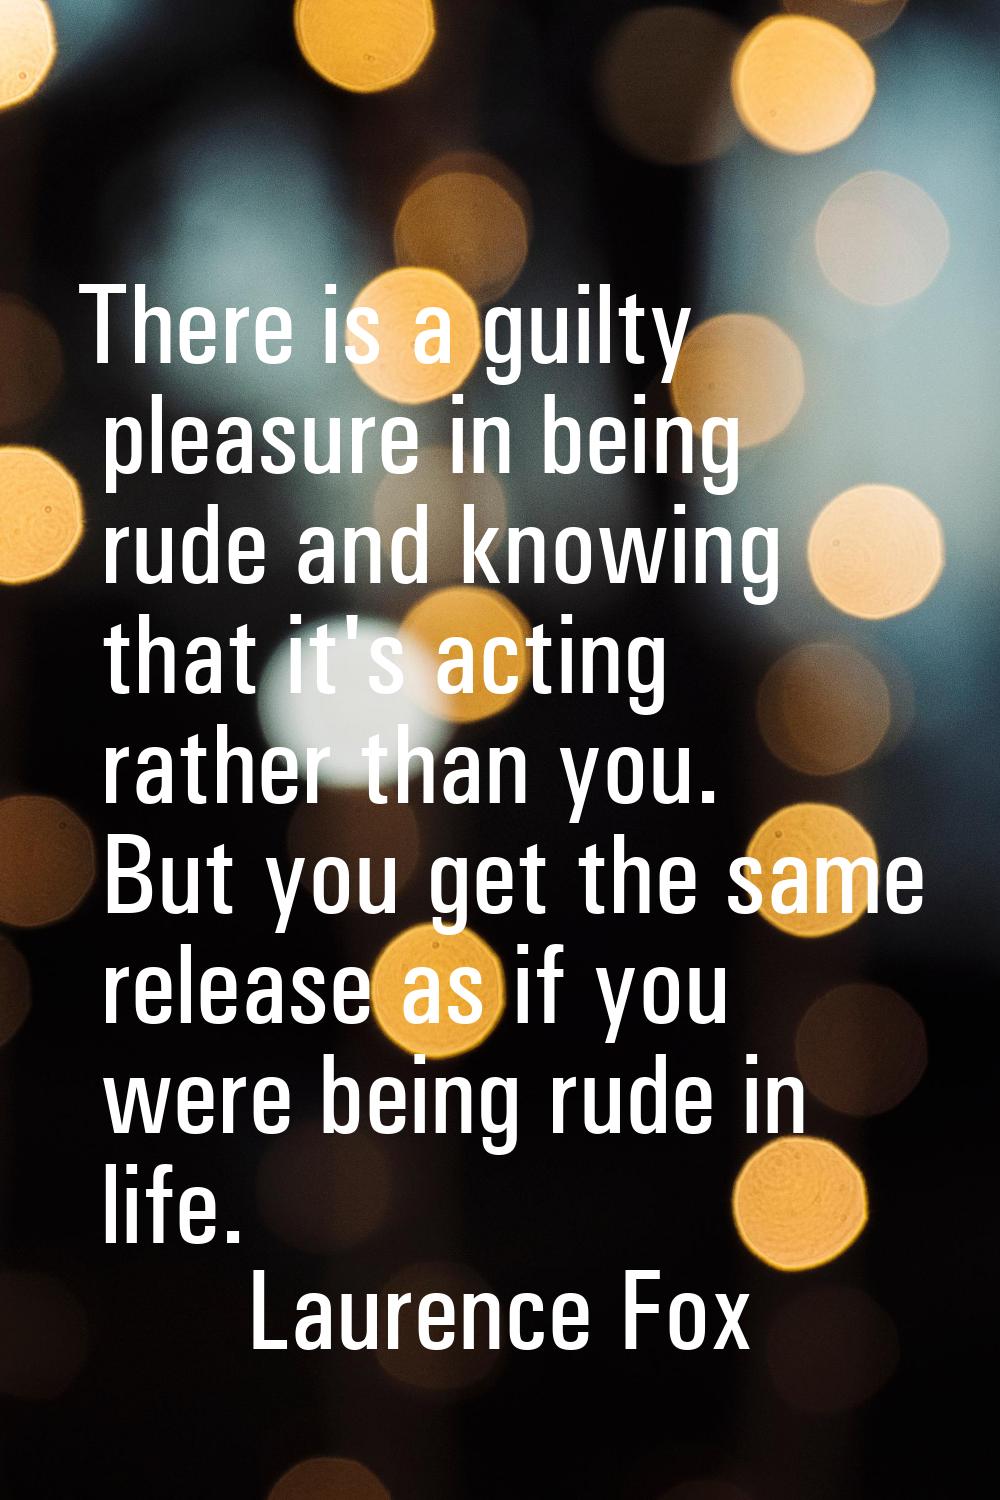 There is a guilty pleasure in being rude and knowing that it's acting rather than you. But you get 